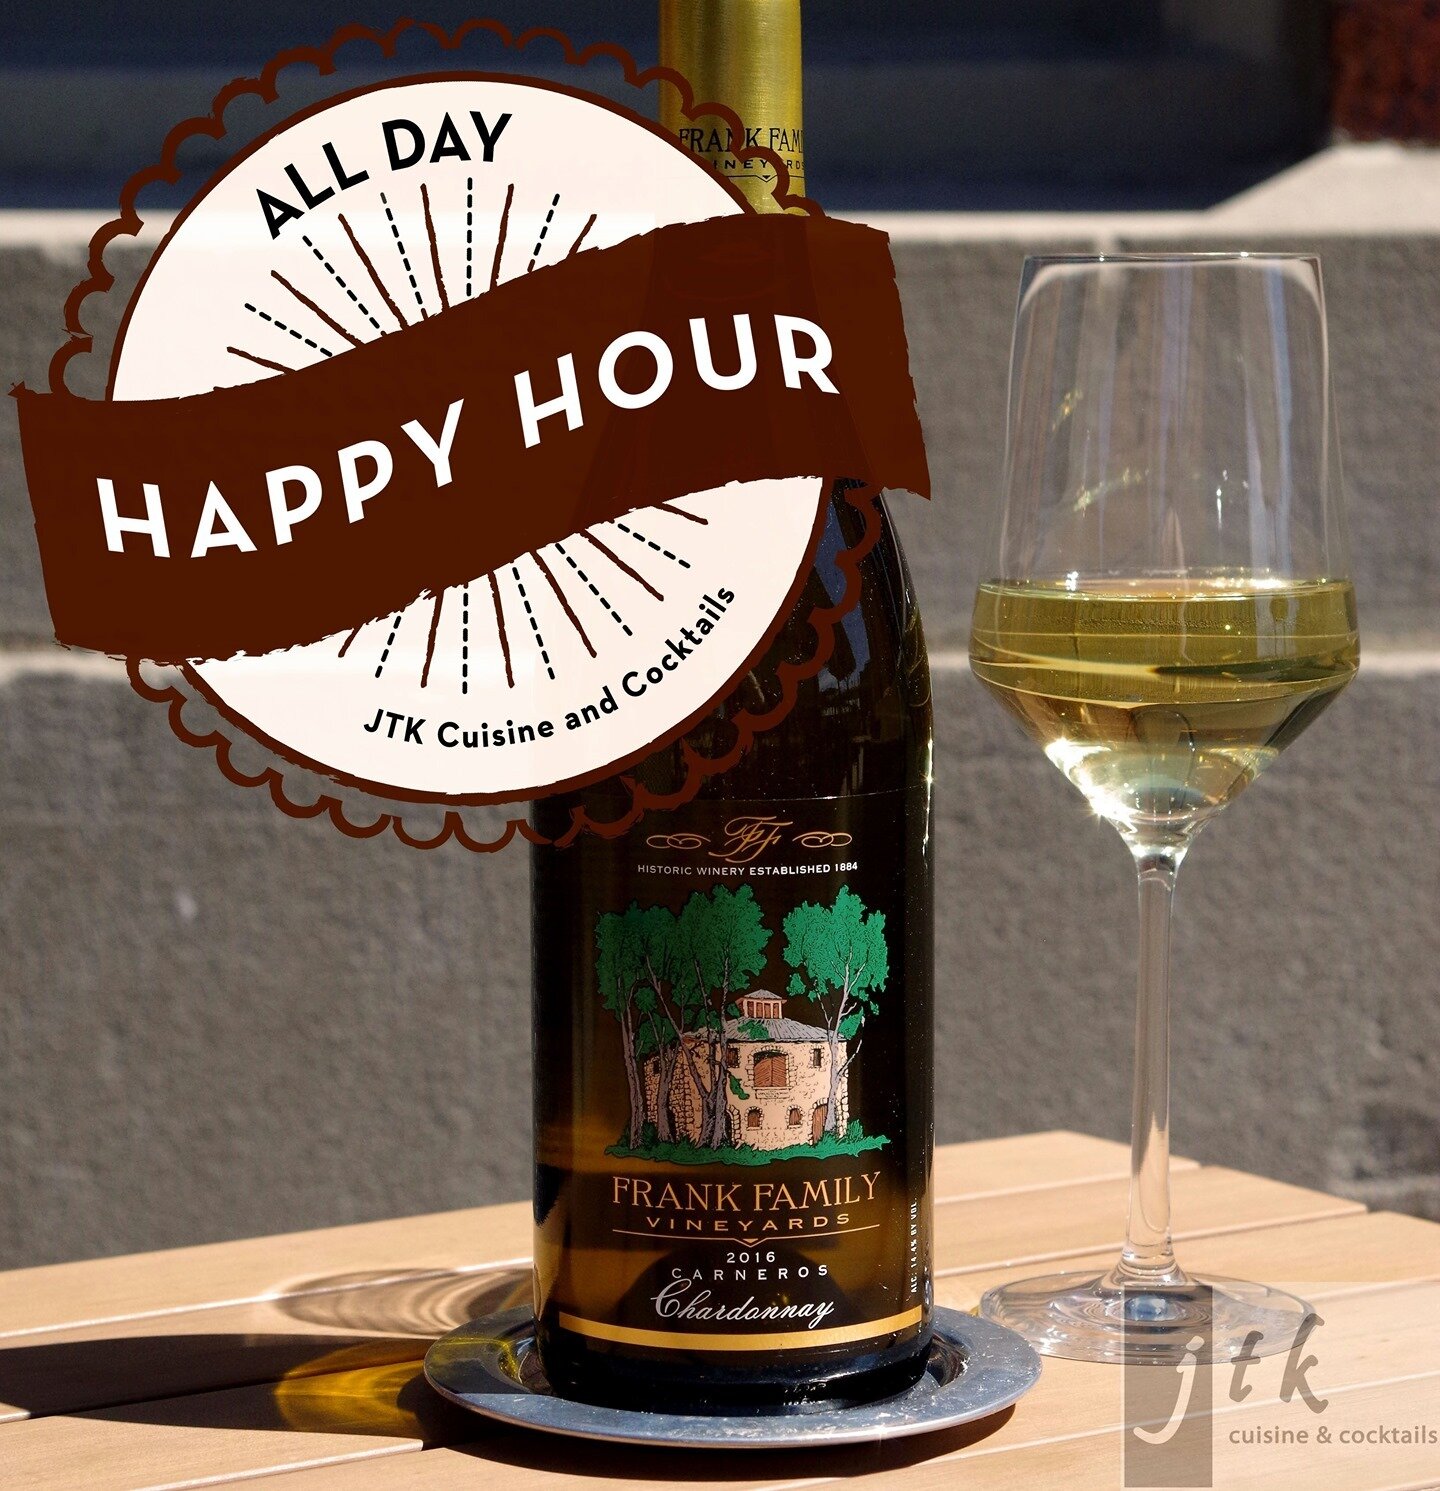 Remember Sunday's isn't only just All Day Happy Hour it's also 1/2 off wine bottles (excludes reserve wine list) and $2 off ALL whiskey drams!⠀⠀⠀⠀
⠀⠀⠀⠀
#haymarketLNK #jtklnk #downtownlincoln #mylnk #lincolnhaymarket #restaurant #wine #winelover #wine